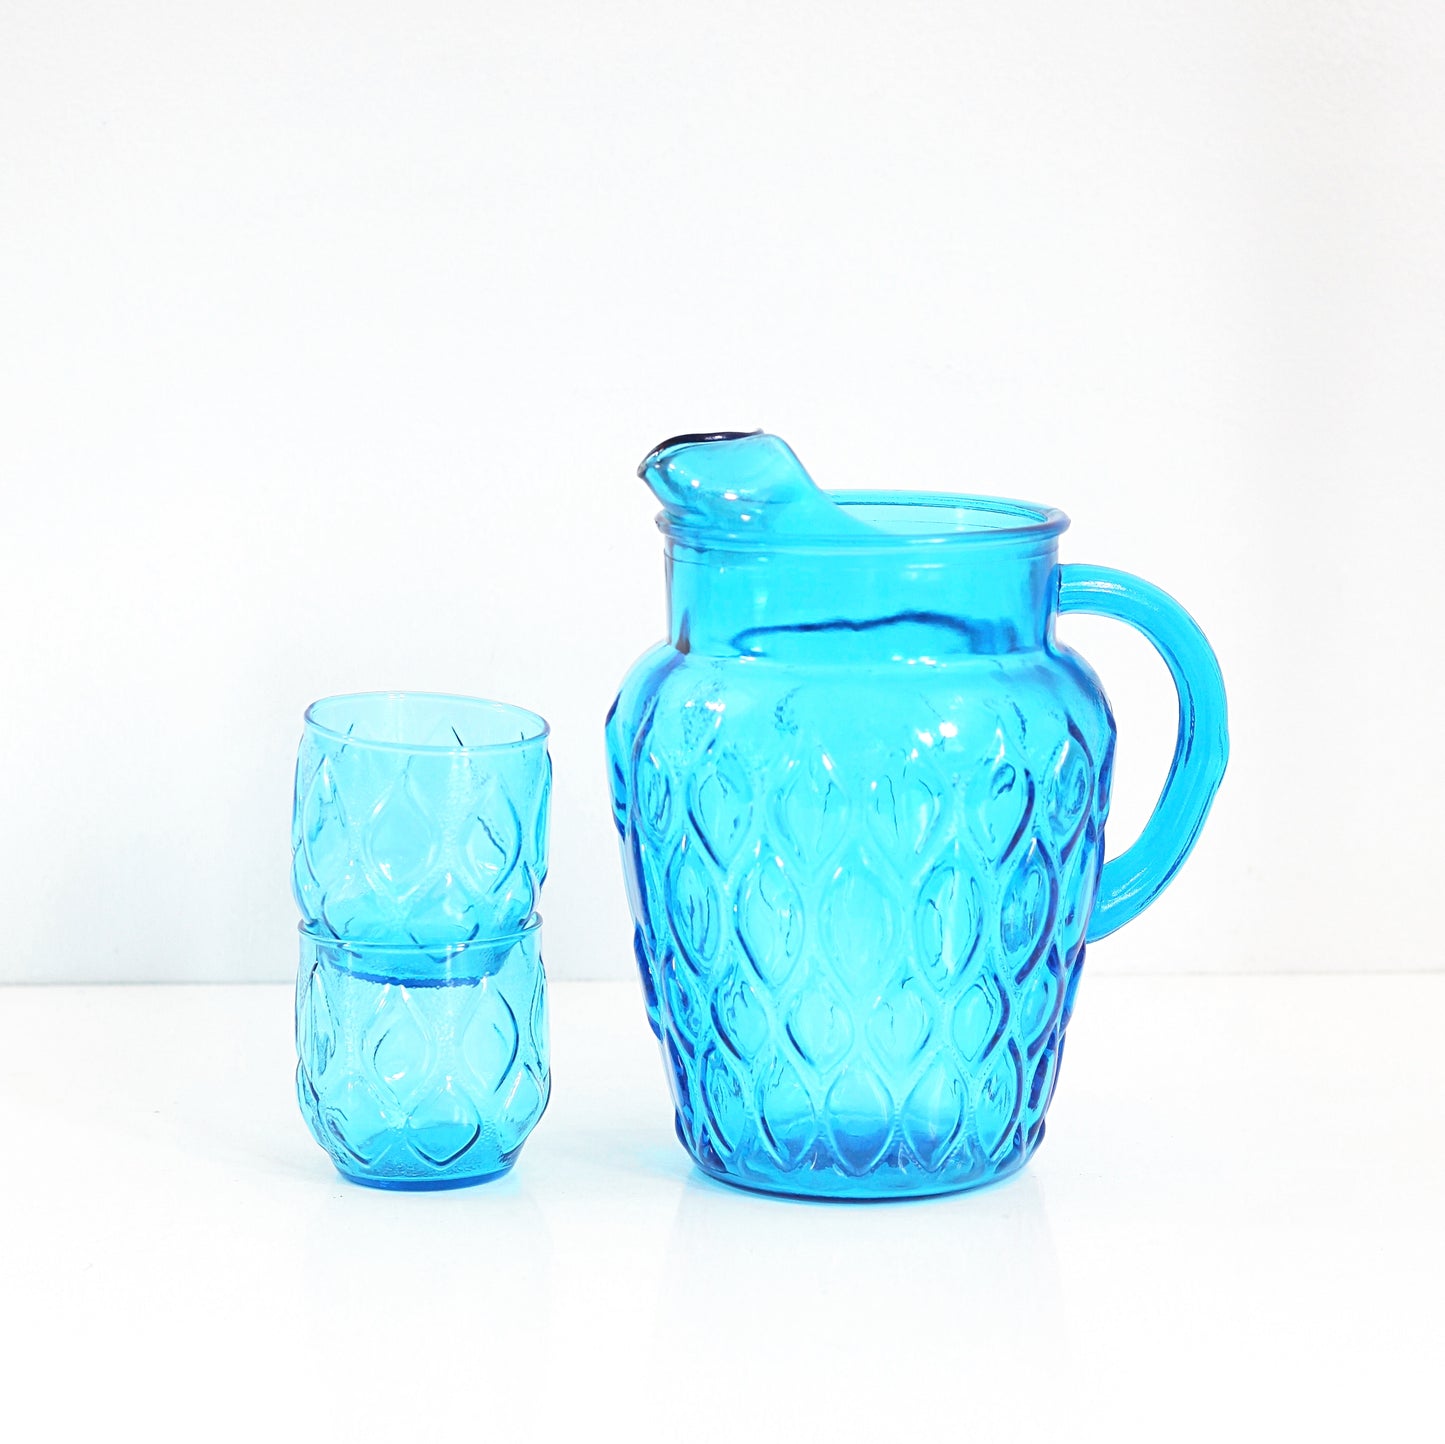 SOLD - Mid Century Turquoise Blue Madrid Pitcher by Anchor Hocking